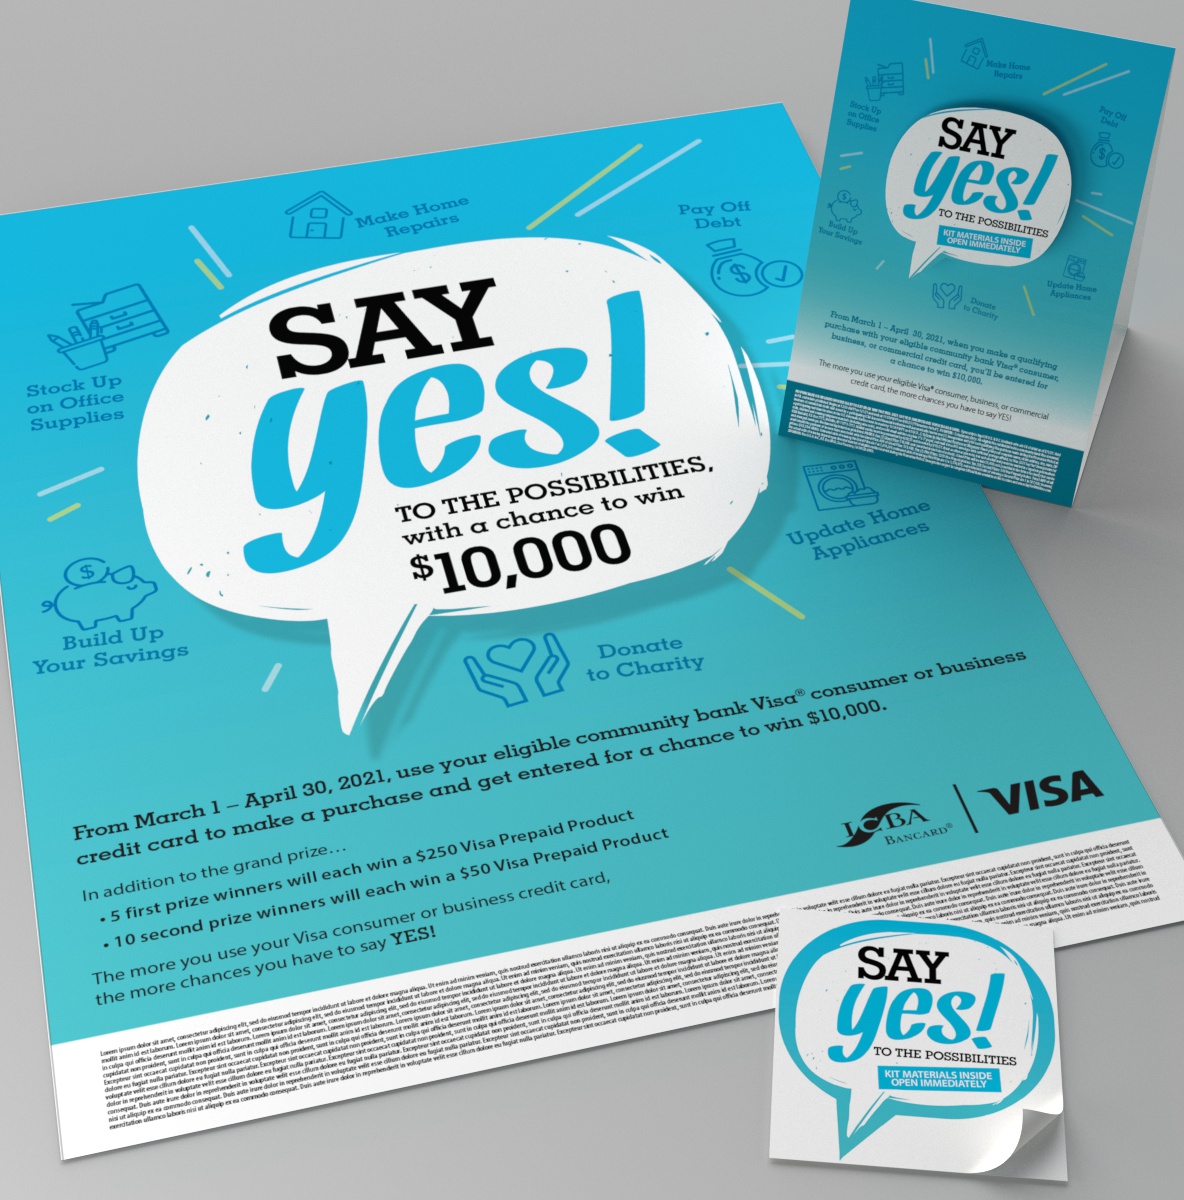 Visa ICBA Say Yes promo materials, includes poster, sticker, and table tent